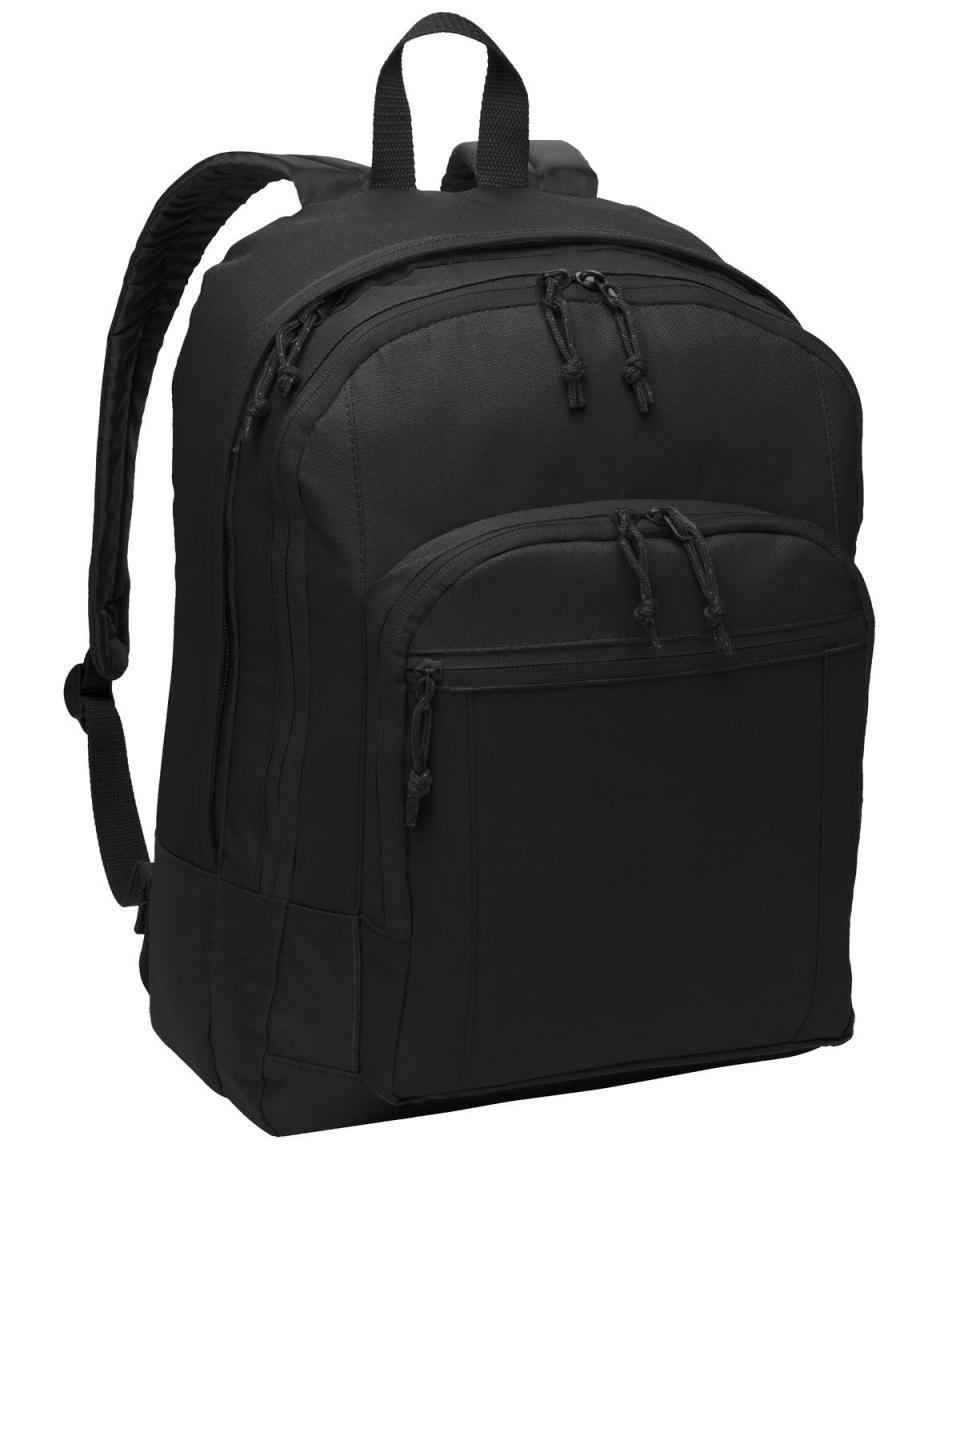 Port Authority Classic Backpack